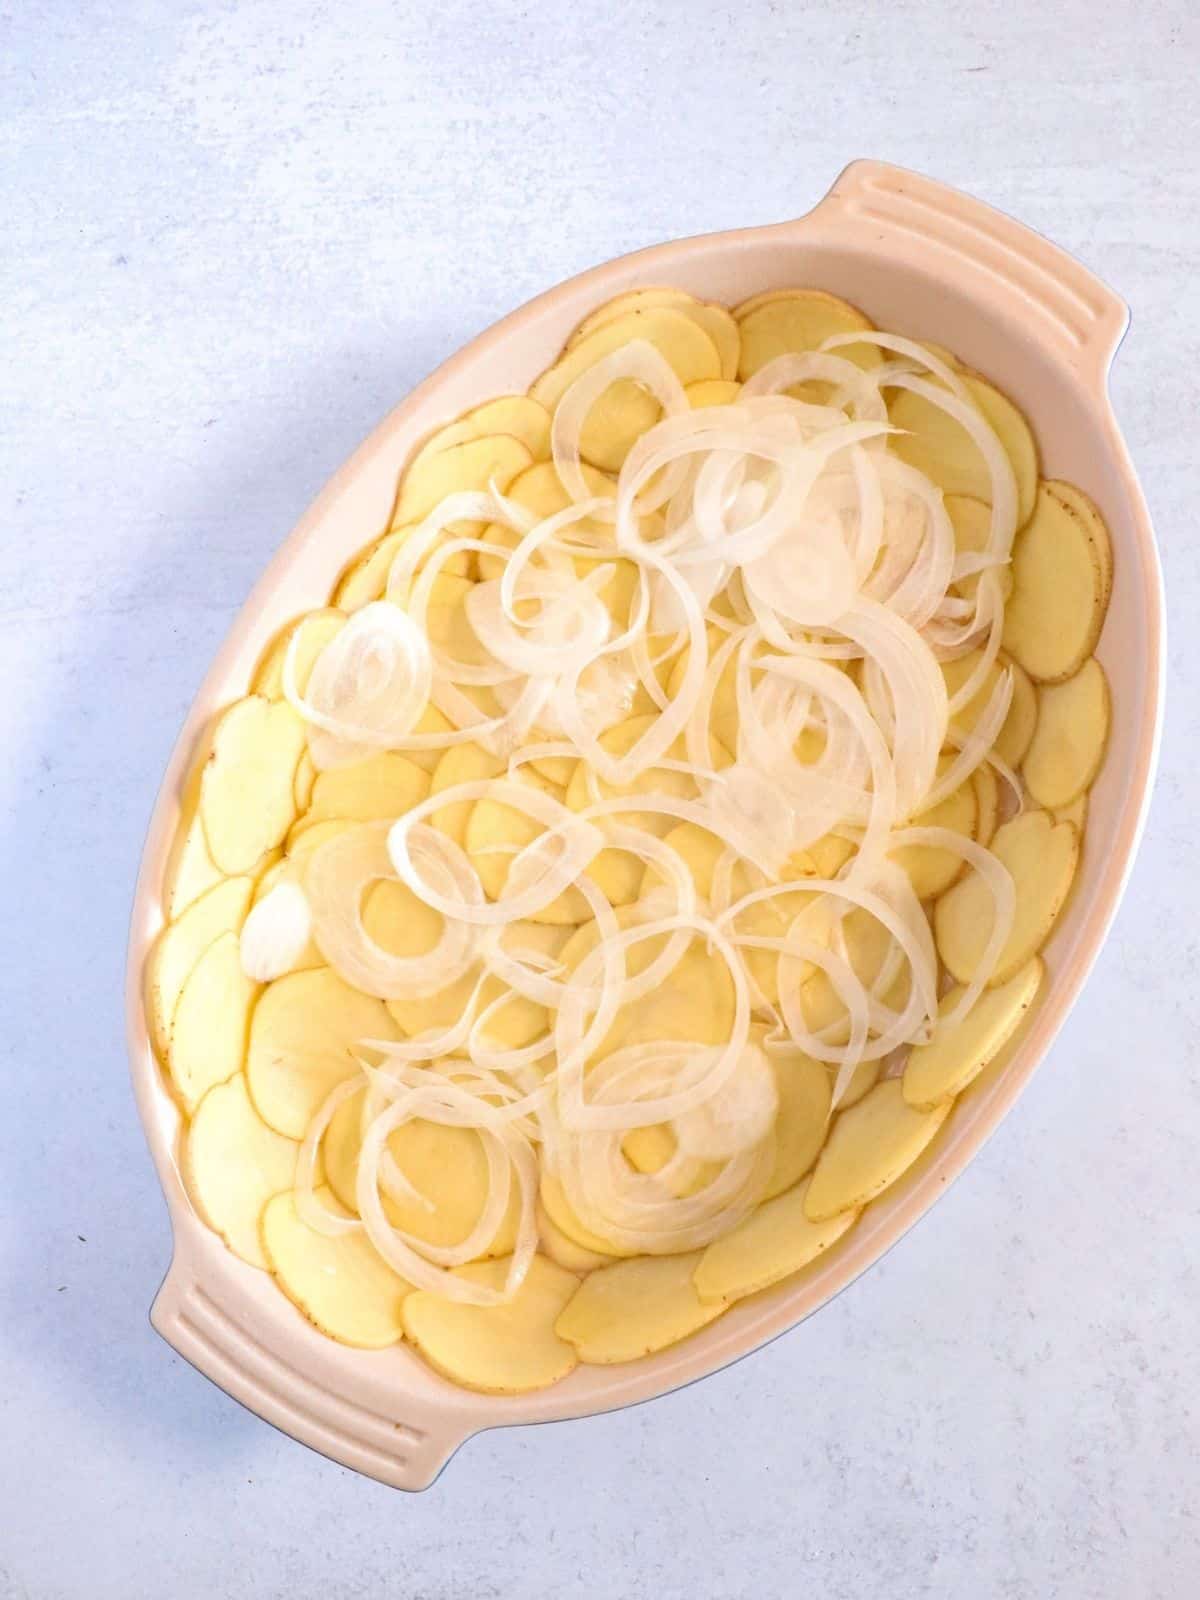 layers of potatoes and onions